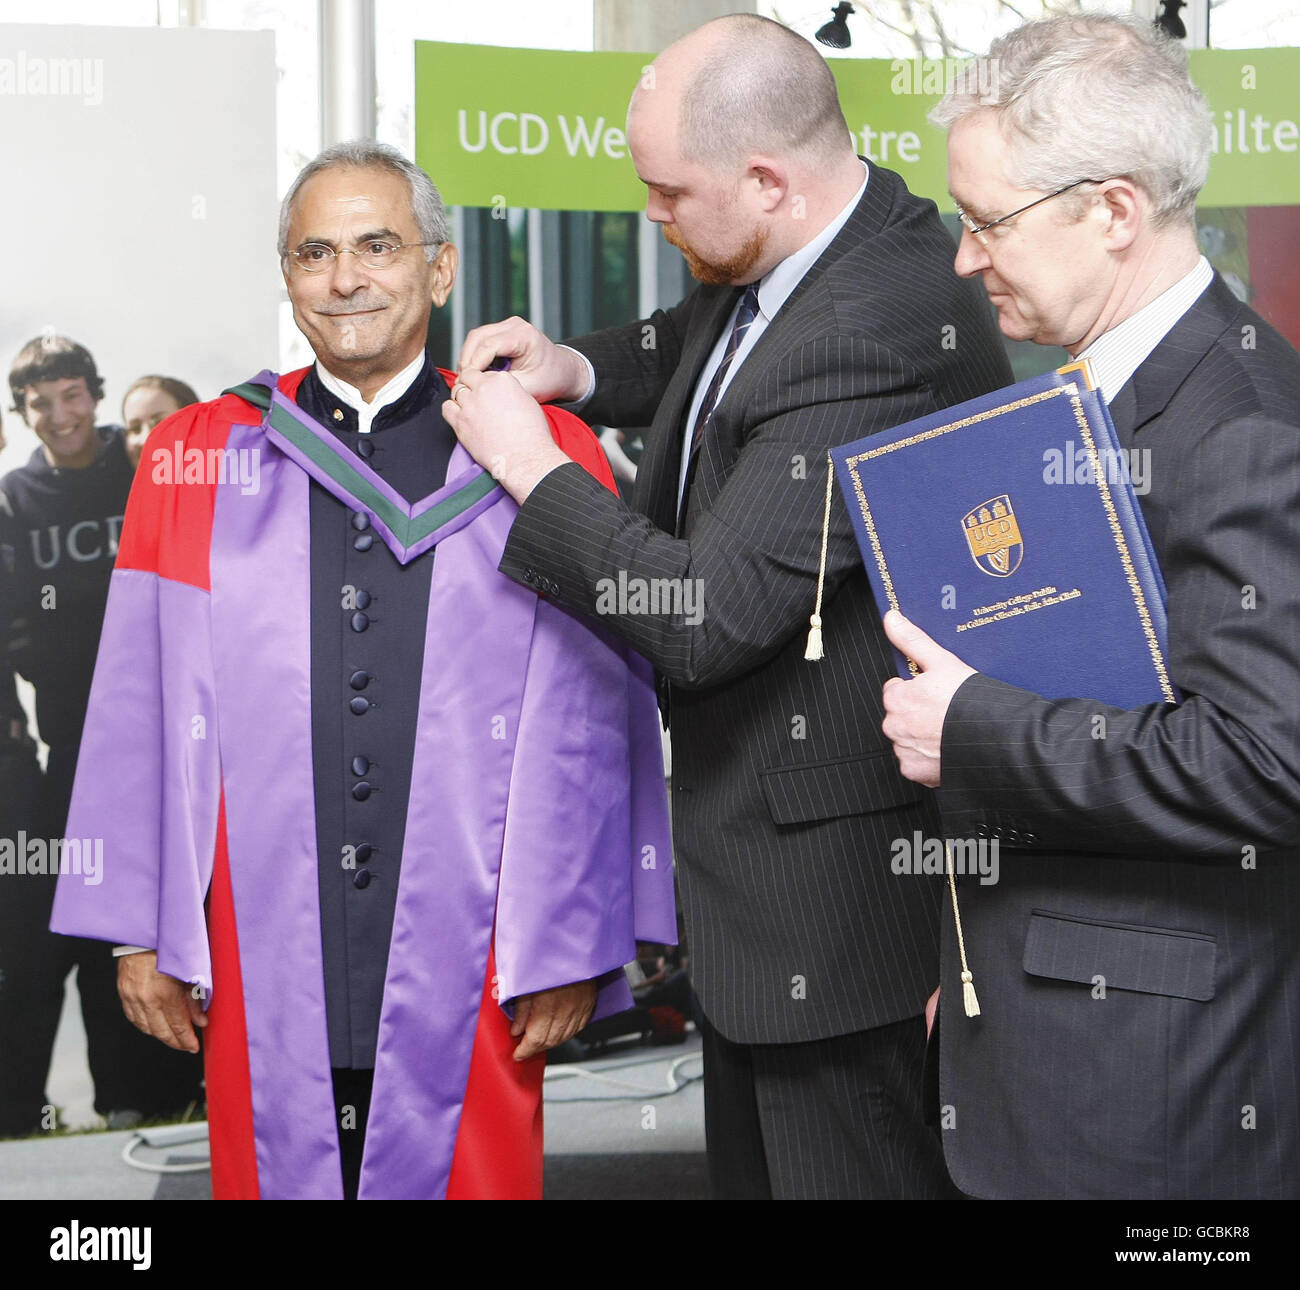 The President of the Democratic Republic of Timor-Leste, Dr Jose Ramos-Horta being dressed before he receives his Honorary Doctorate of Laws, at the University College, Dublin. Stock Photo